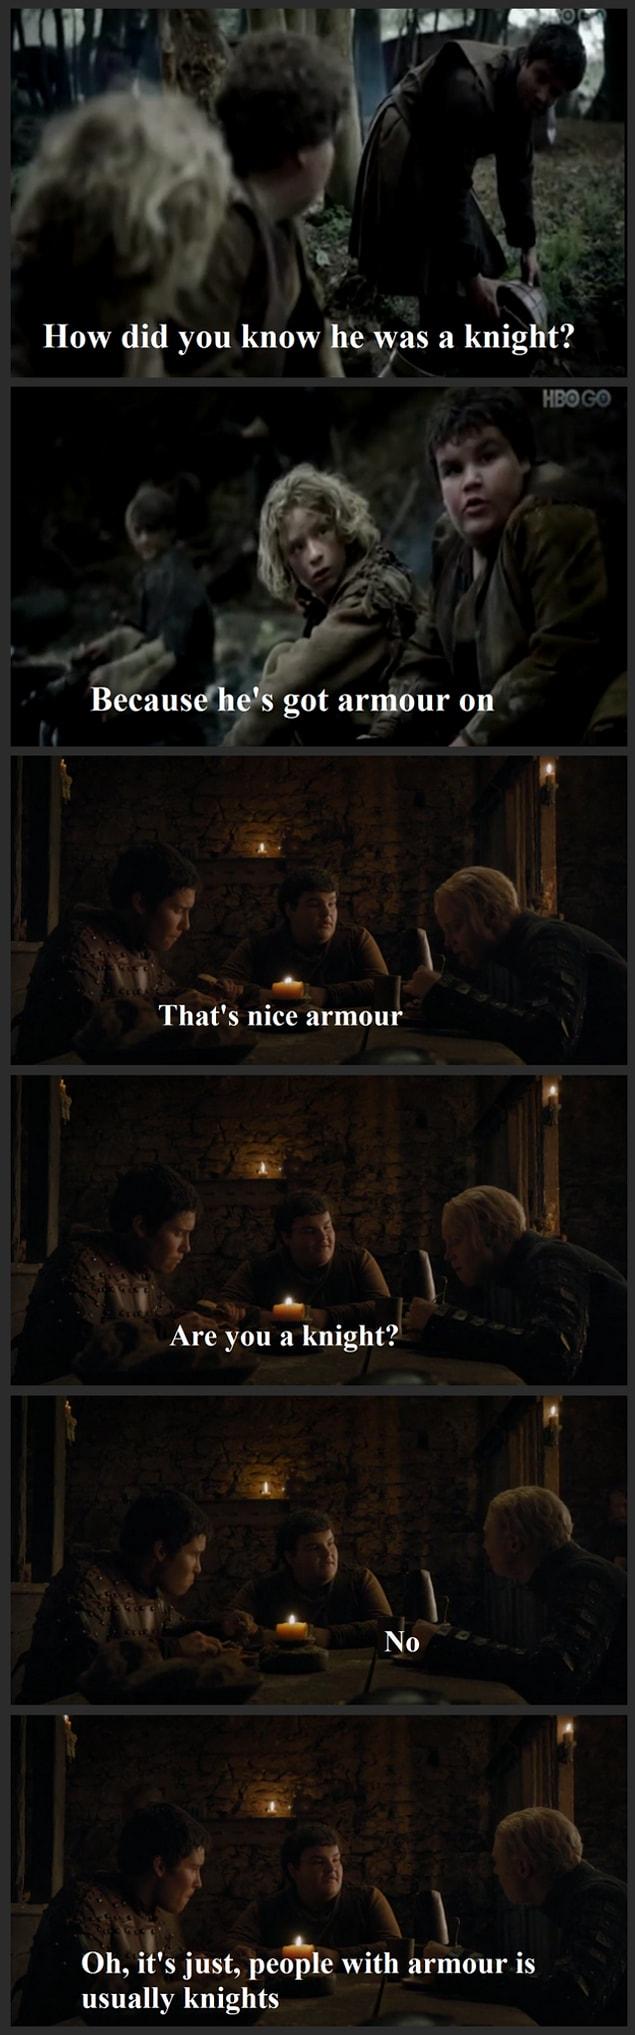 19. And here, Gendry teaches some stuff to Hot Pie about knights.